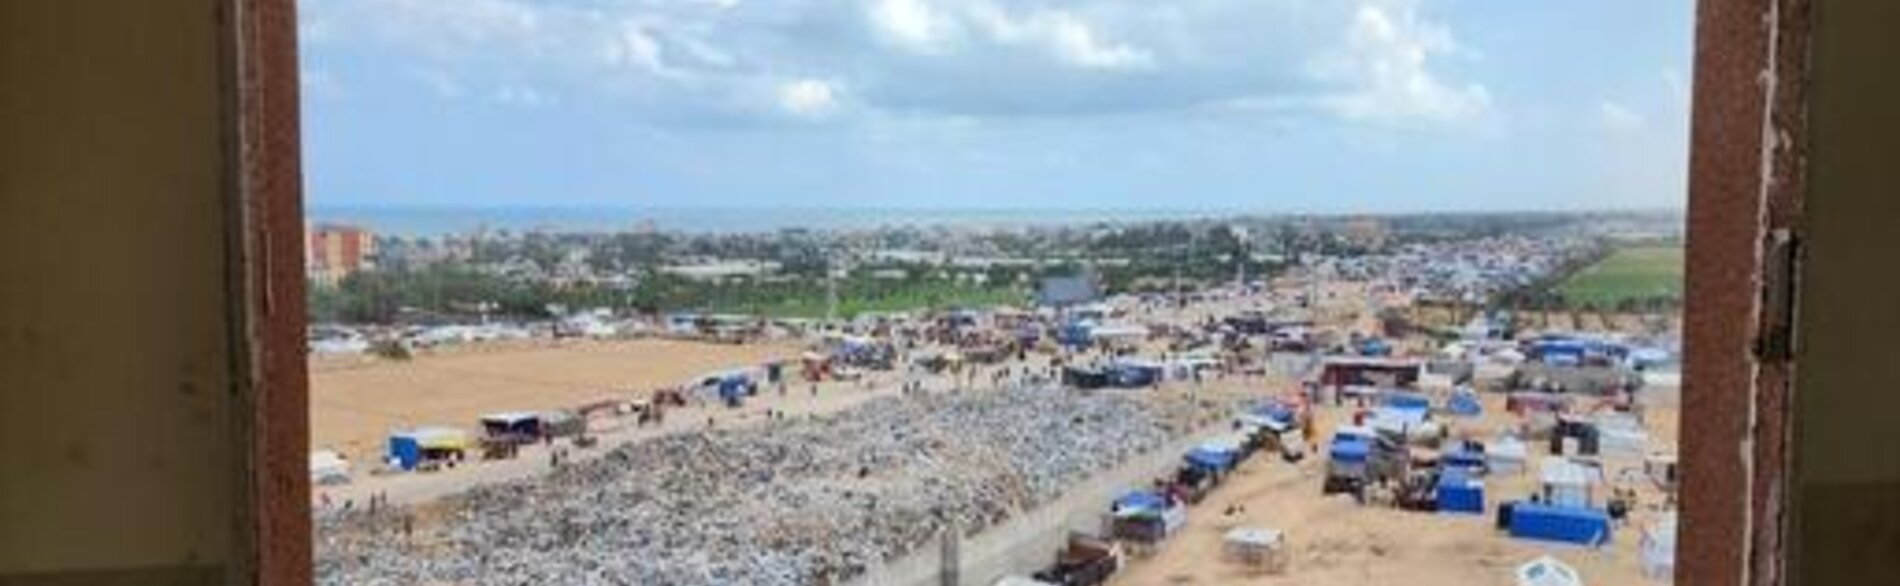 Piles of waste alongside the tents of displaced people in Rafah, southern Gaza Strip. Photo: UNICEF, Iyad El Baba